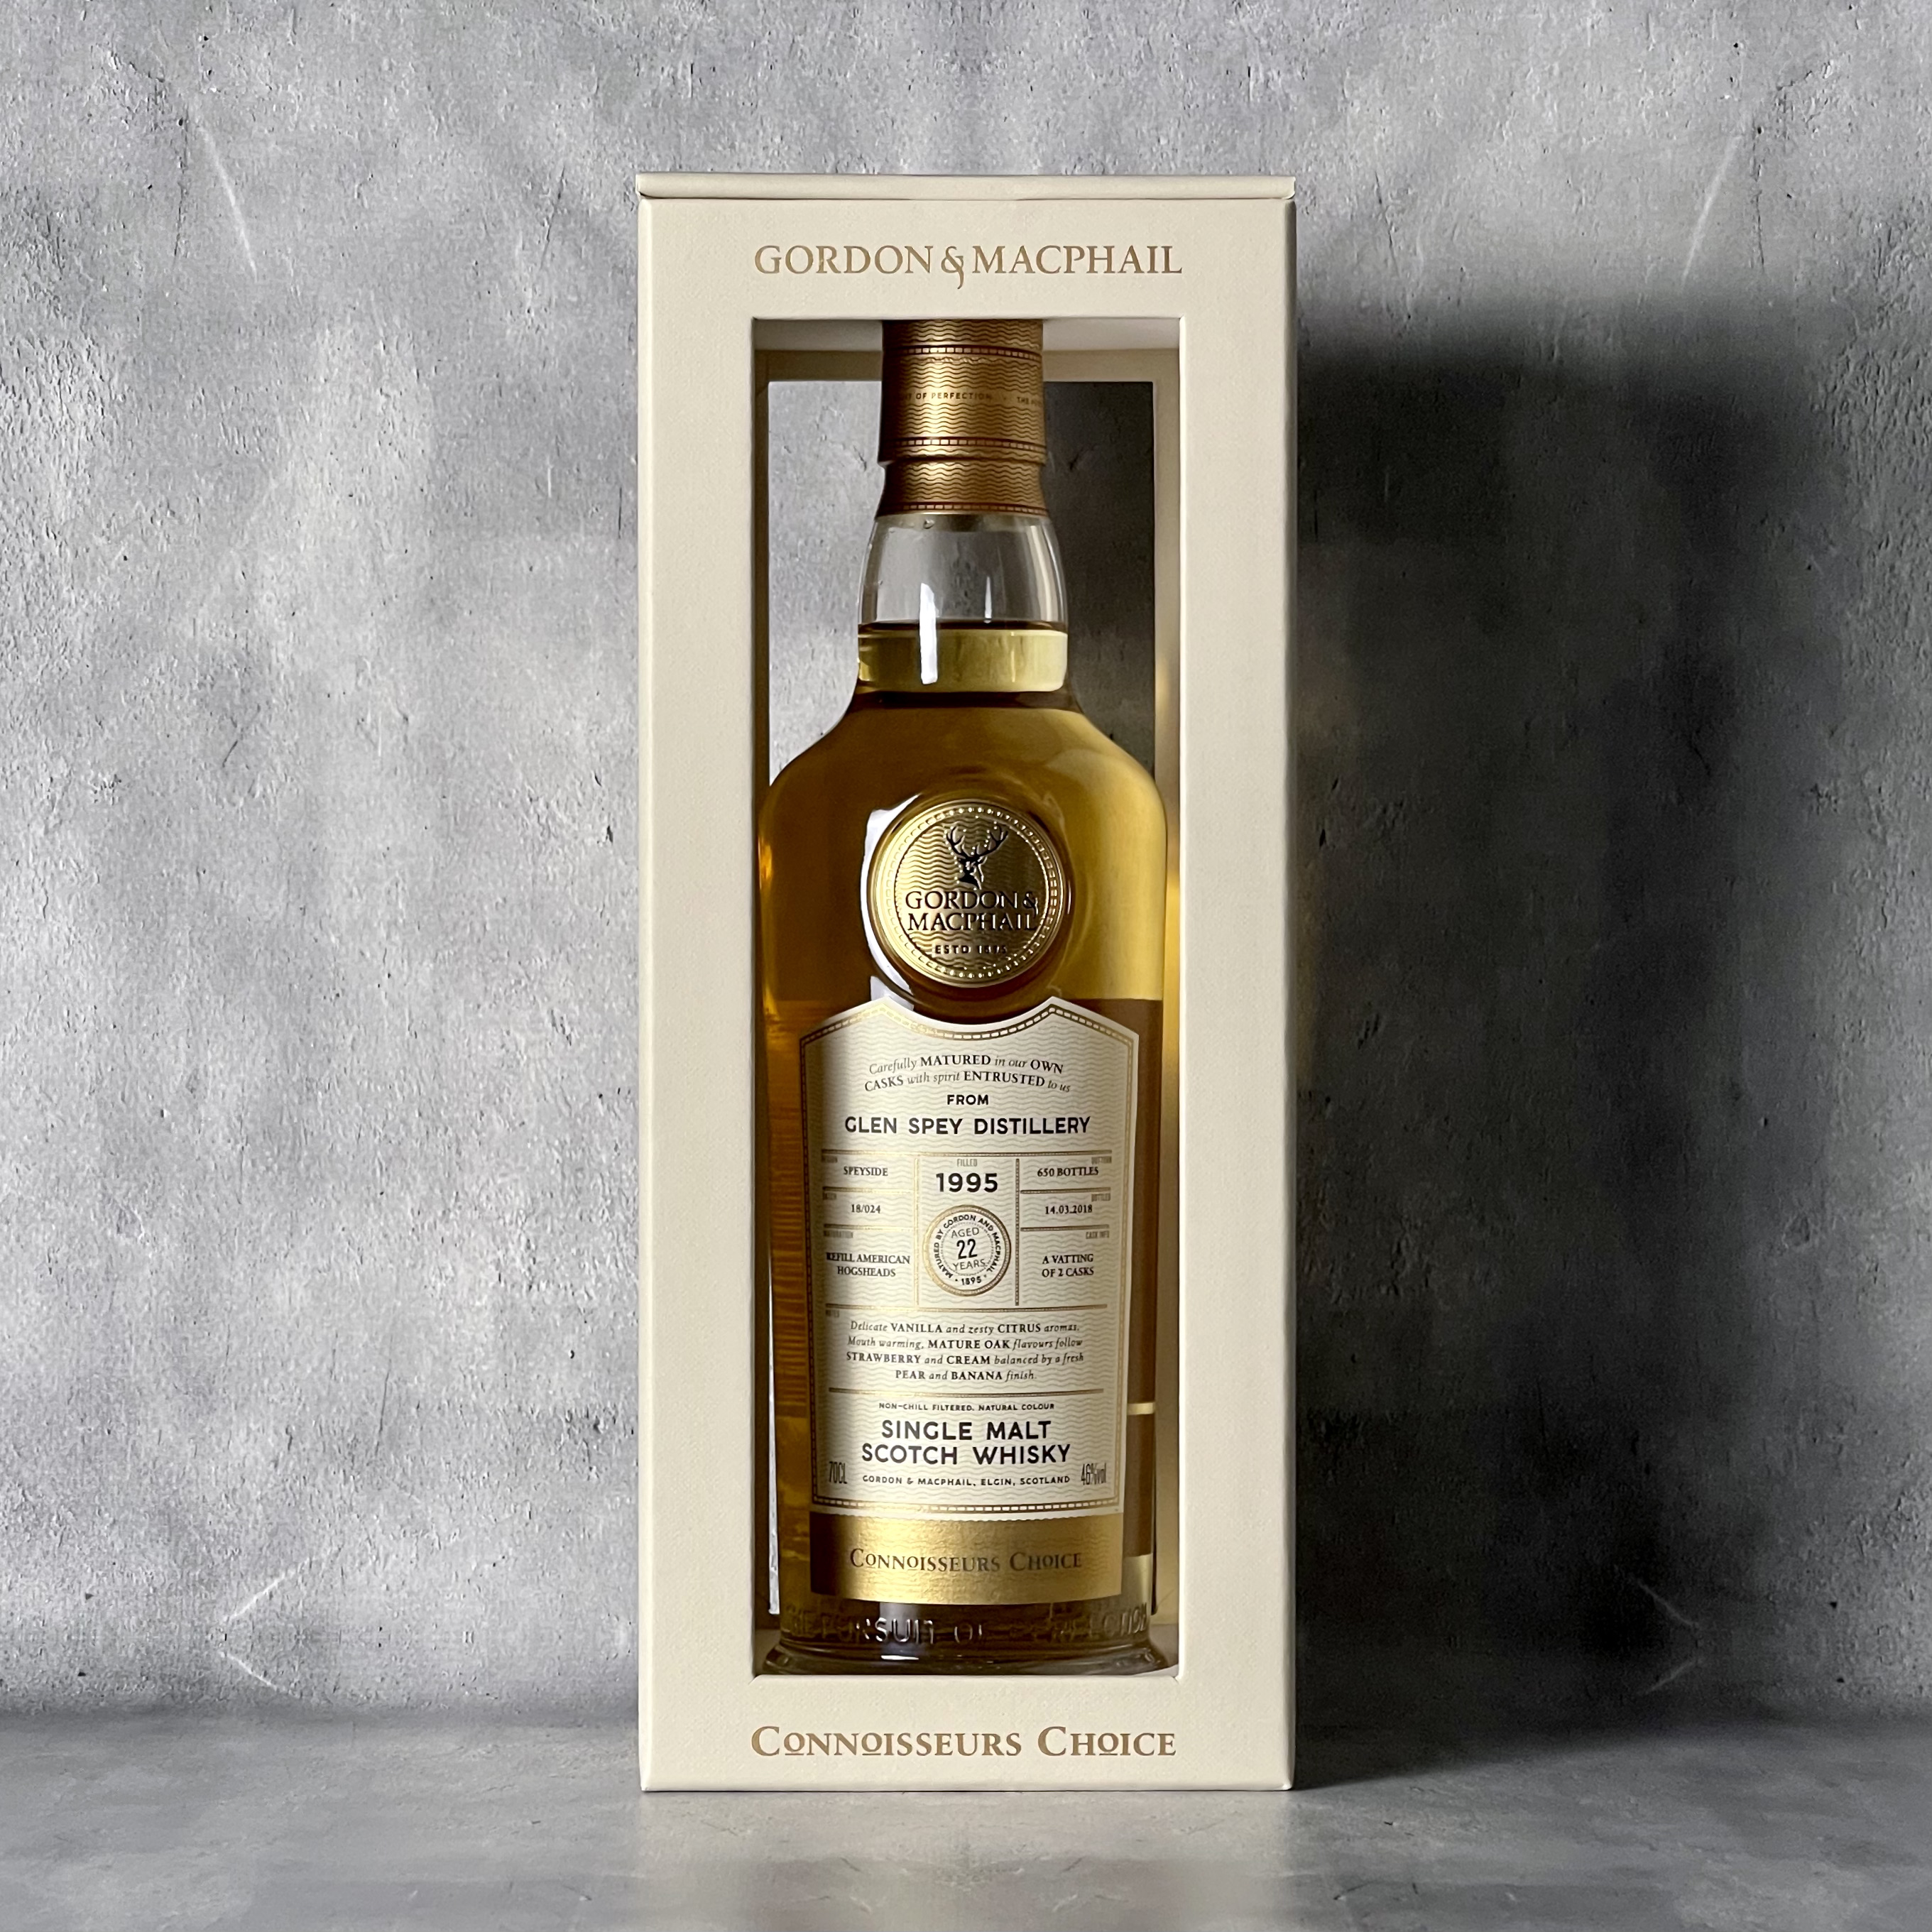 WHISKY LOVERS ONLINESHOP / グレイスペイ 1995 22年 ゴードン＆マク